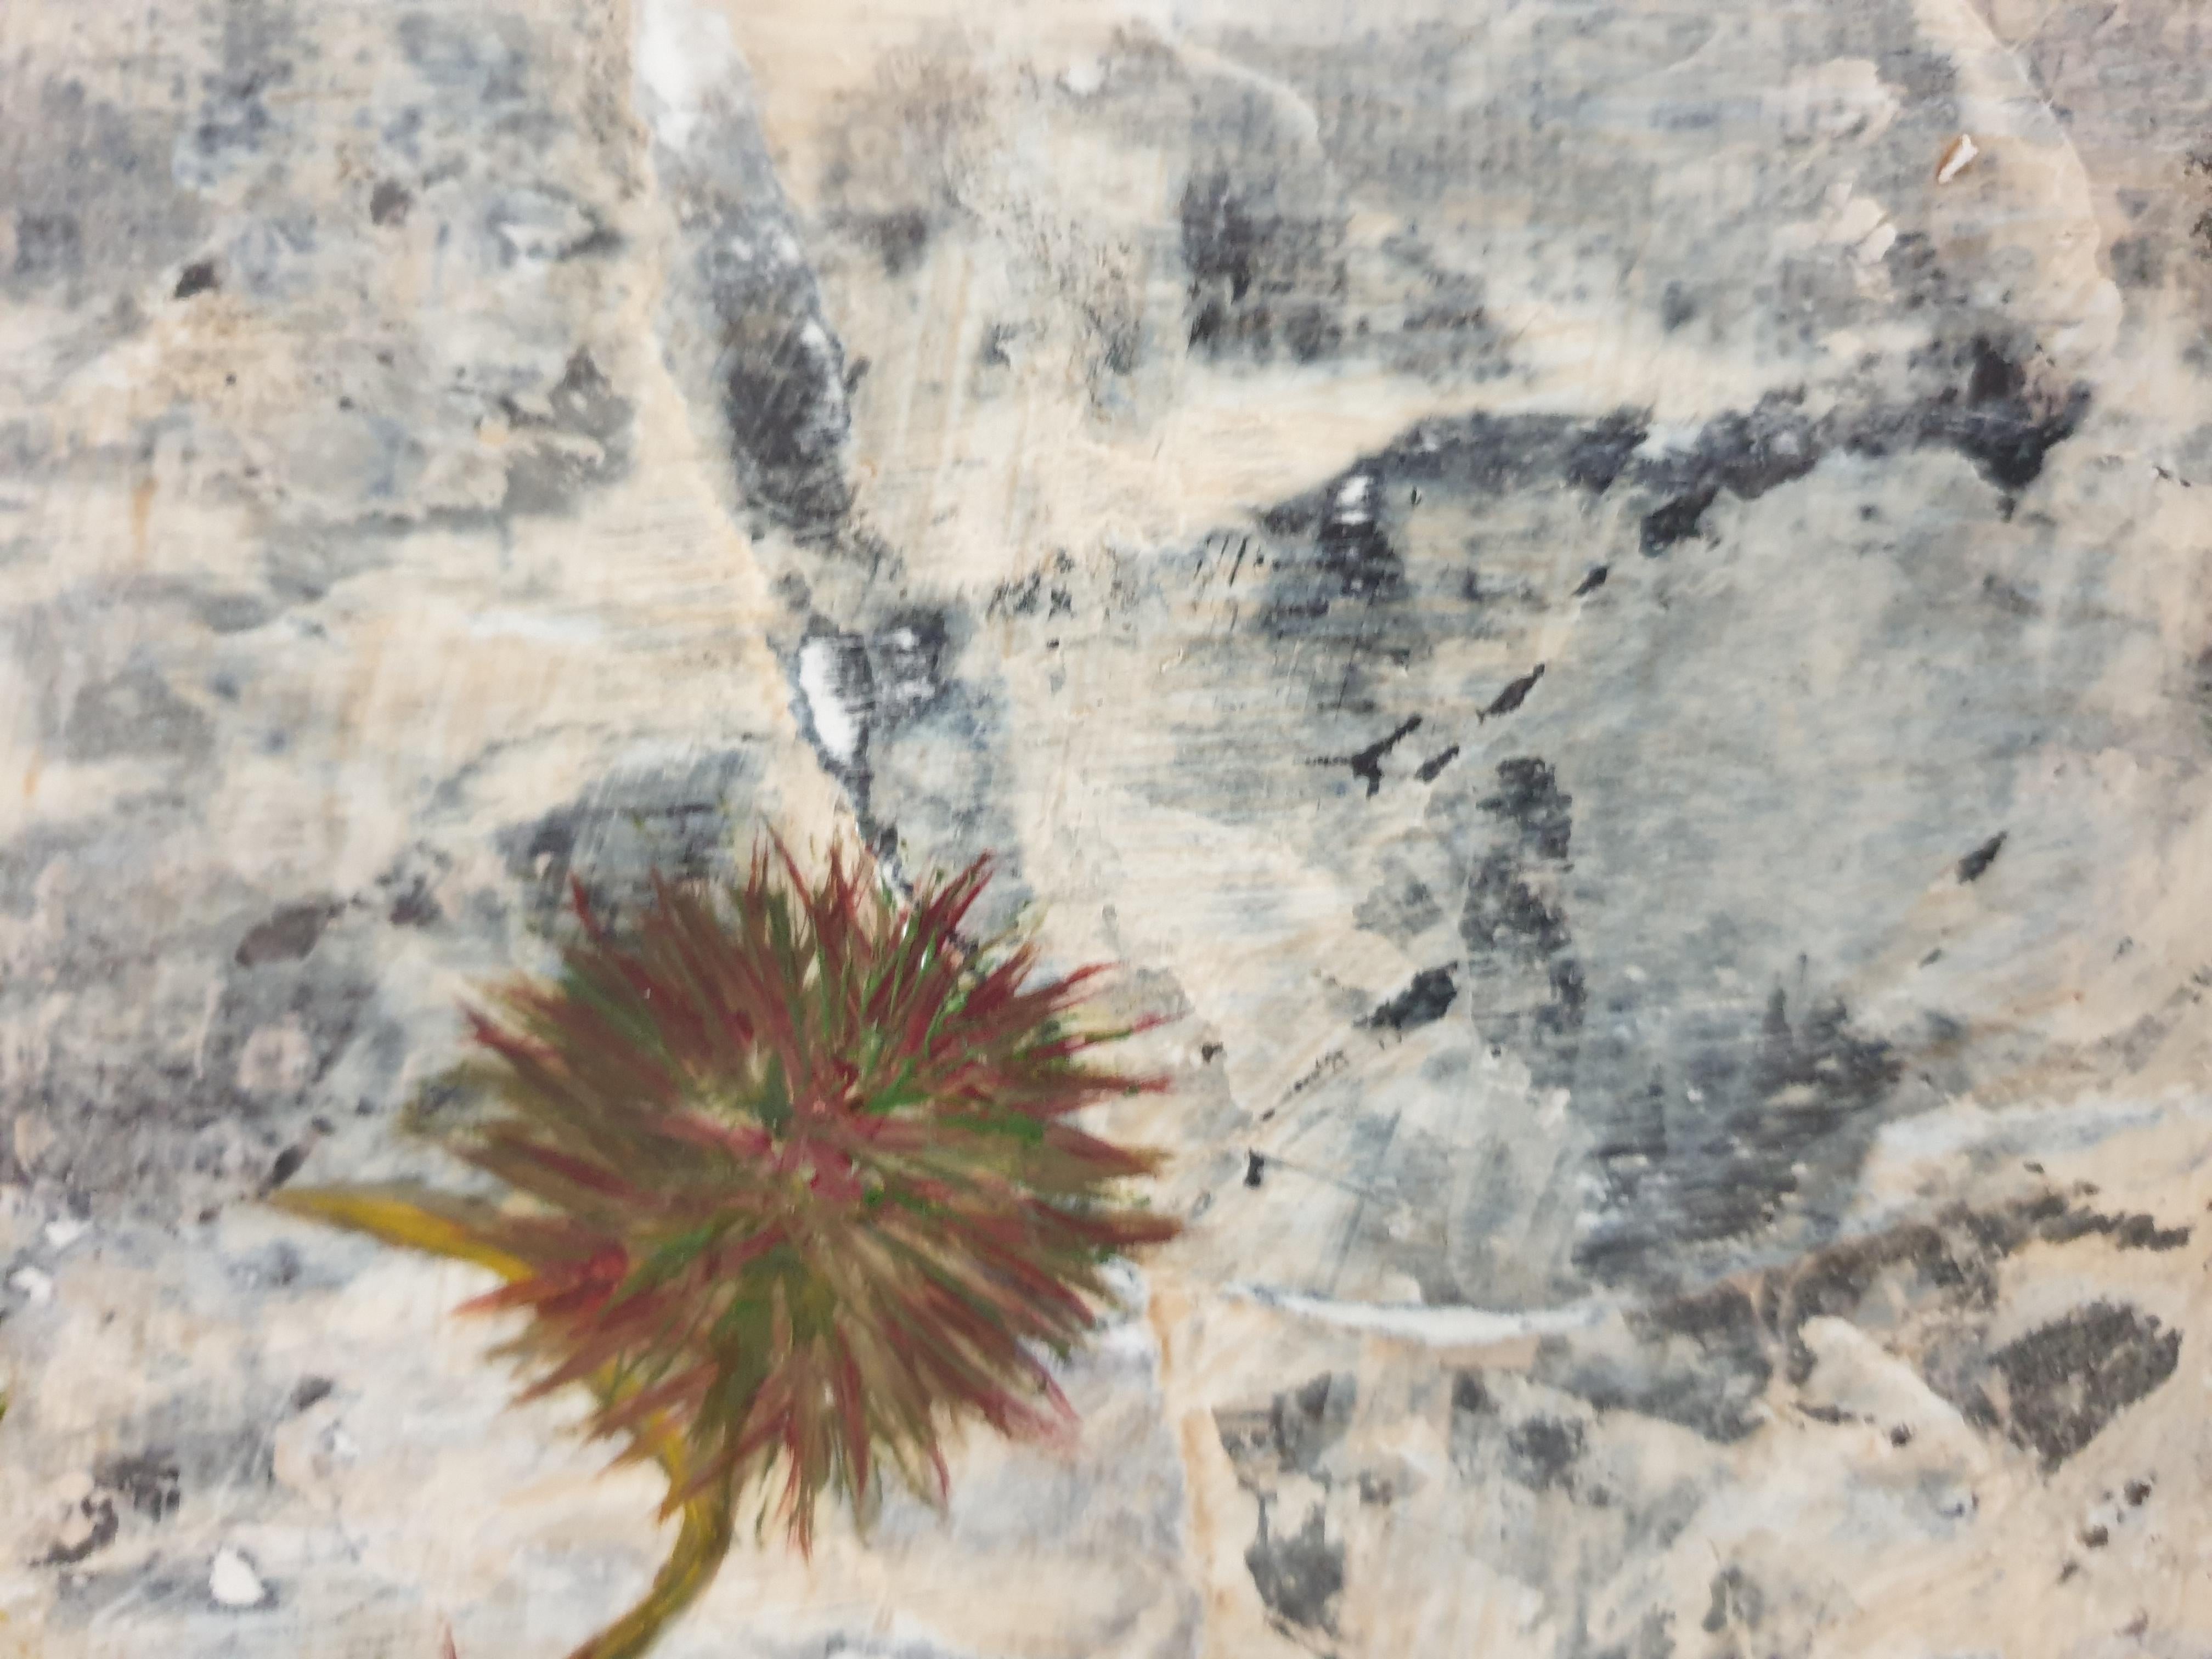 Gomphrena. Botanical Study, Découpage, Acrylic, Oil and Mixed-media on Board. For Sale 2